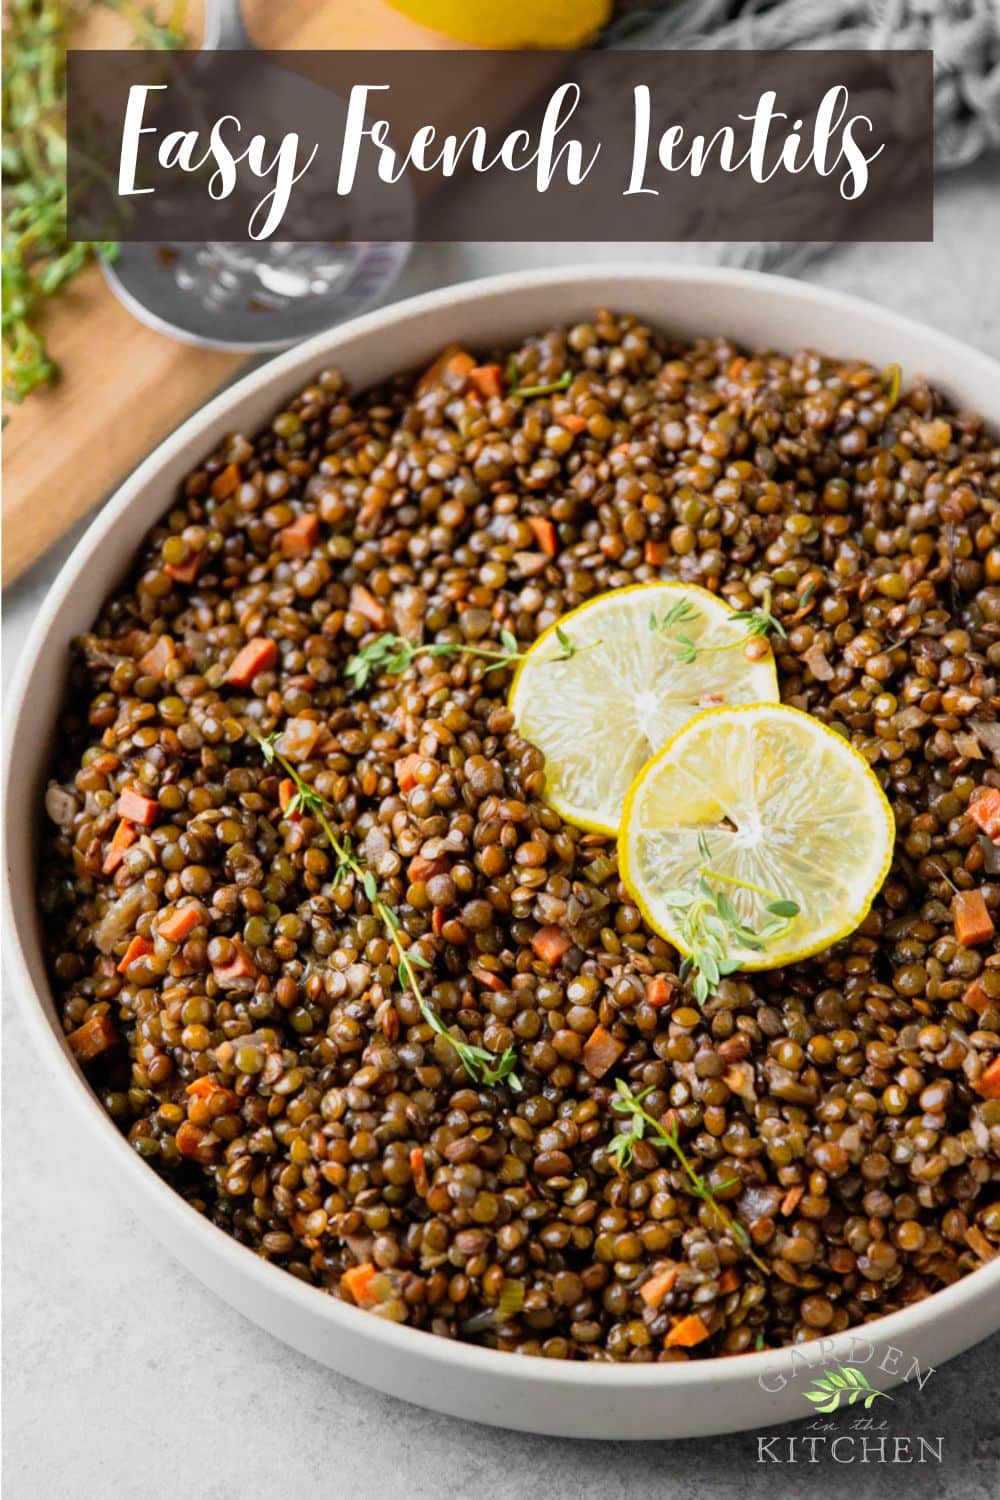 Cooked French lentils, silver spoon, lemon slices, fresh thyme, in a Le Creuset pot, wooden cutting board.